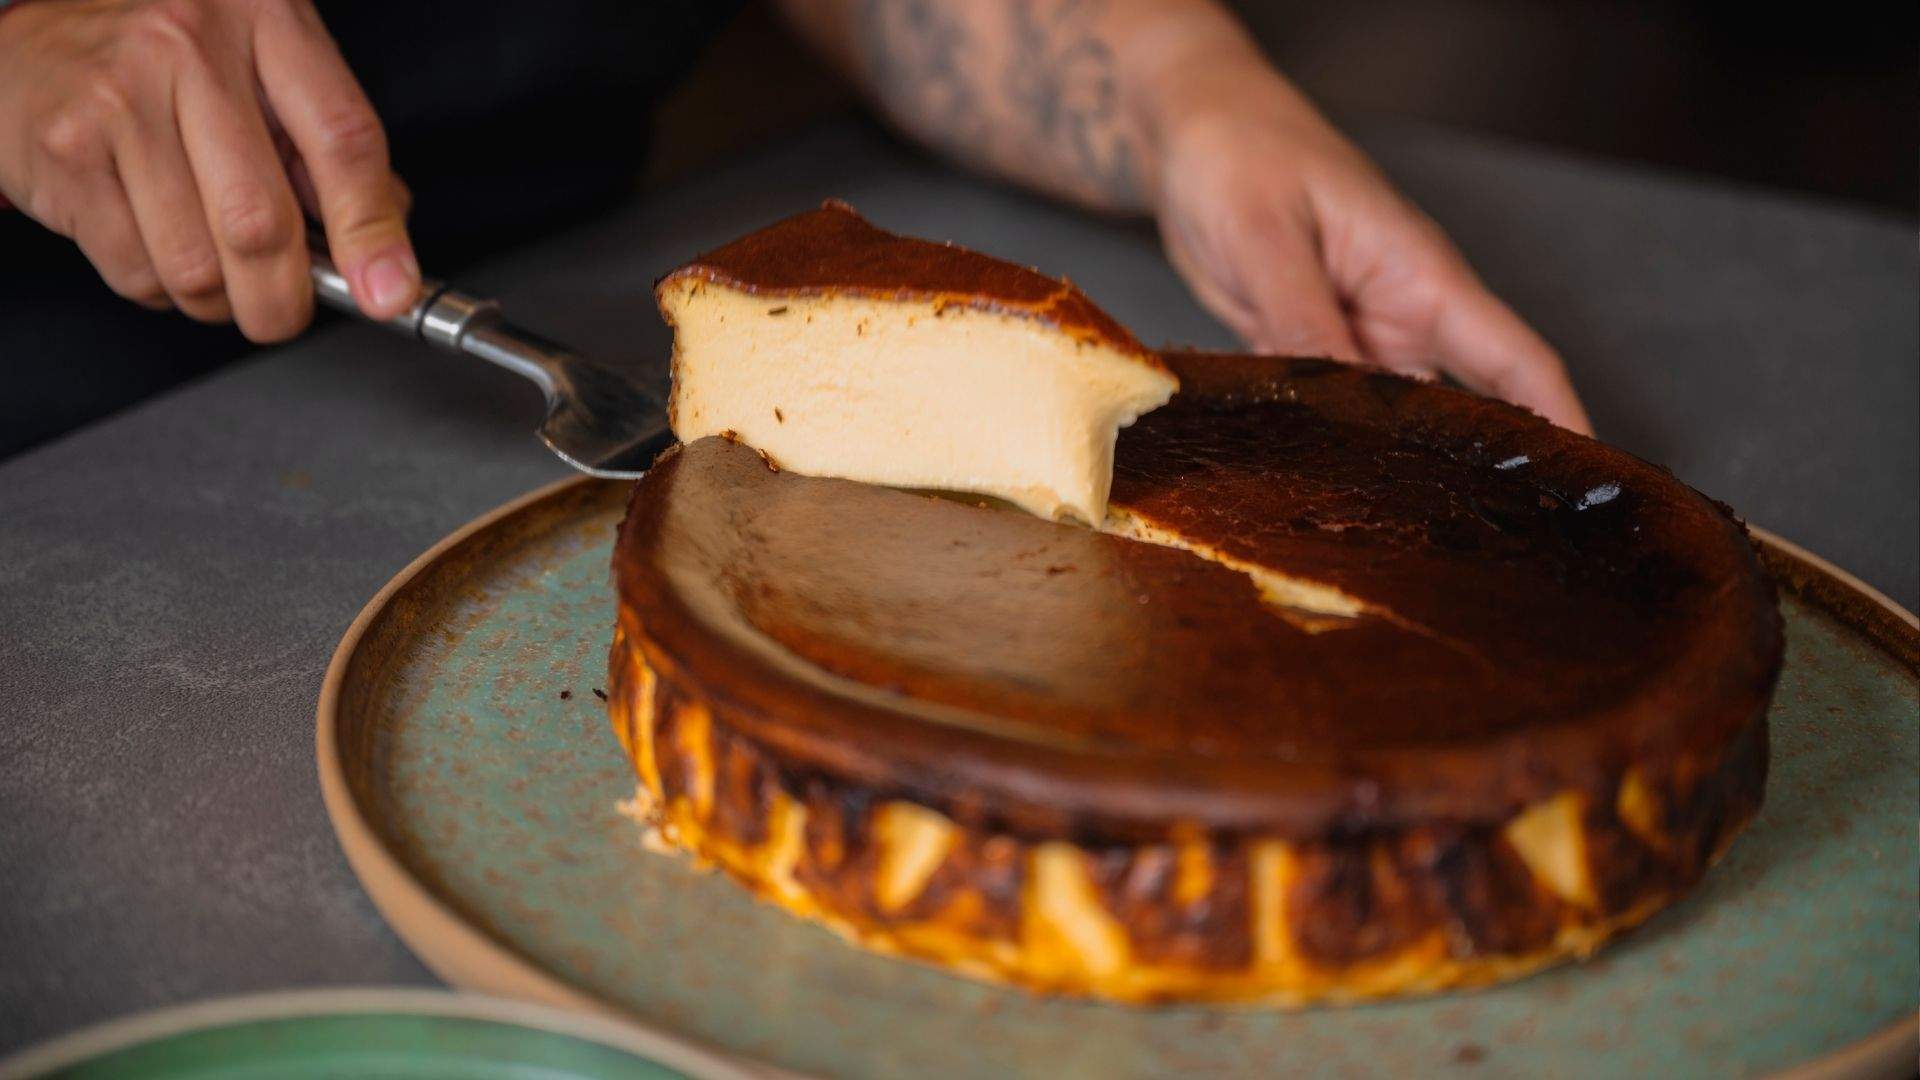 A slice of burnt cheesecake for smooth, velvety goodness with balanced sweetness and a touch of smoke from Two Good Cafe Co's october menu by chef Mat Lindsay.